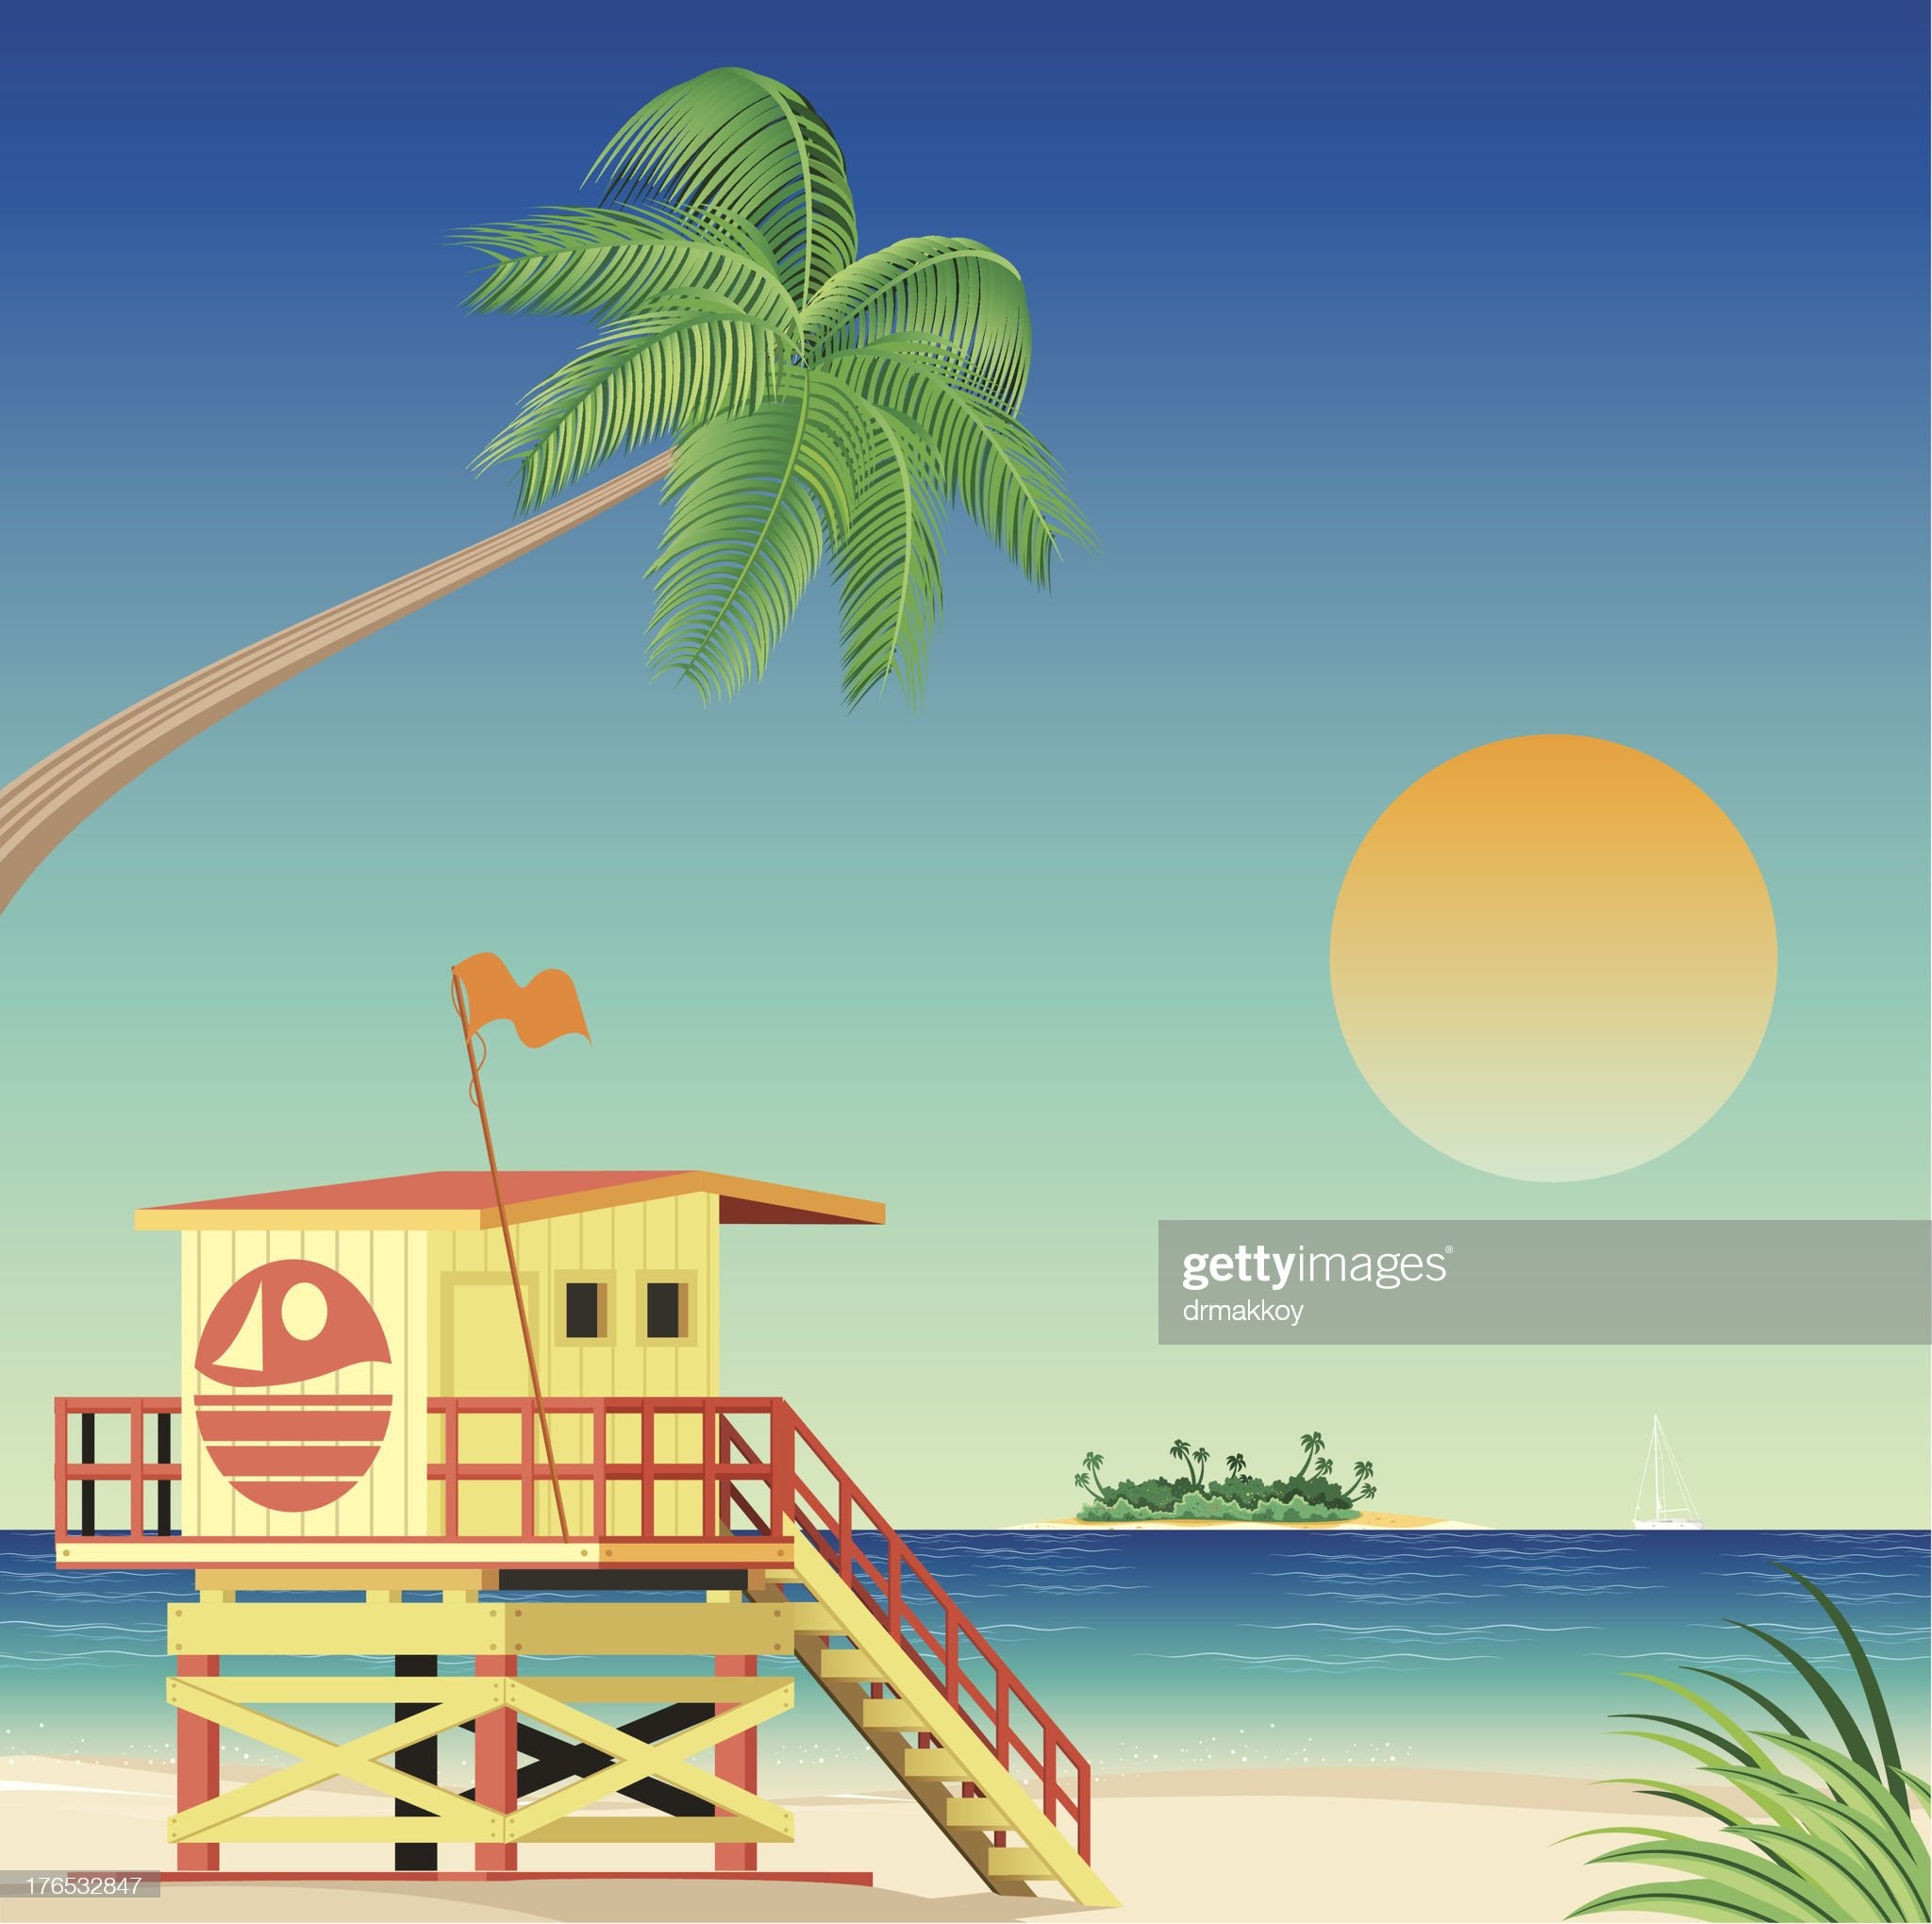 Illustration of a life guard stand on Miami beach. 